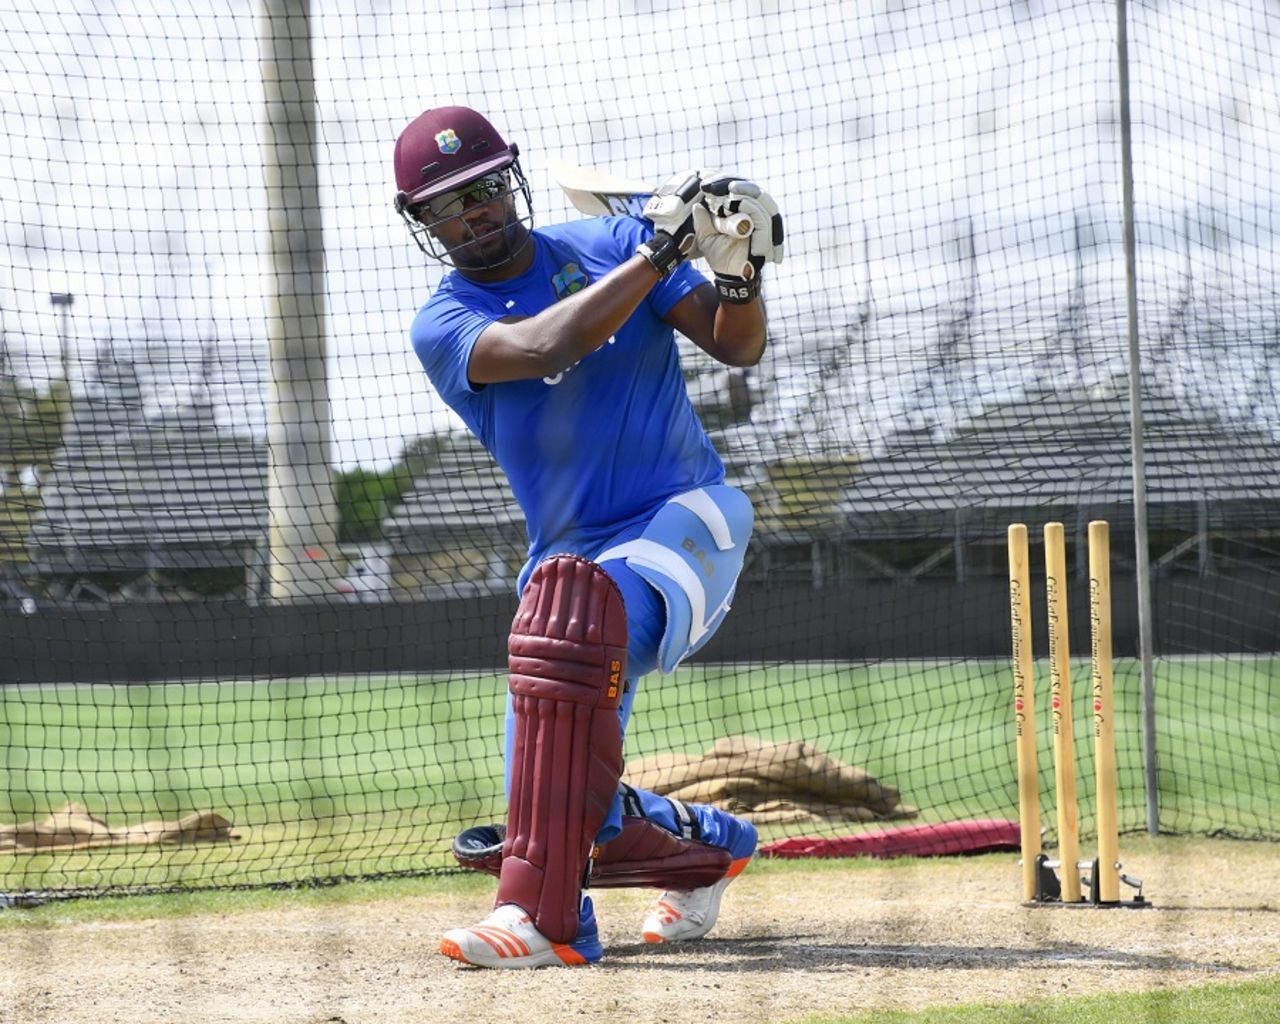 Johnson Charles has a hit at the nets, Lauderhill, August 26, 2016